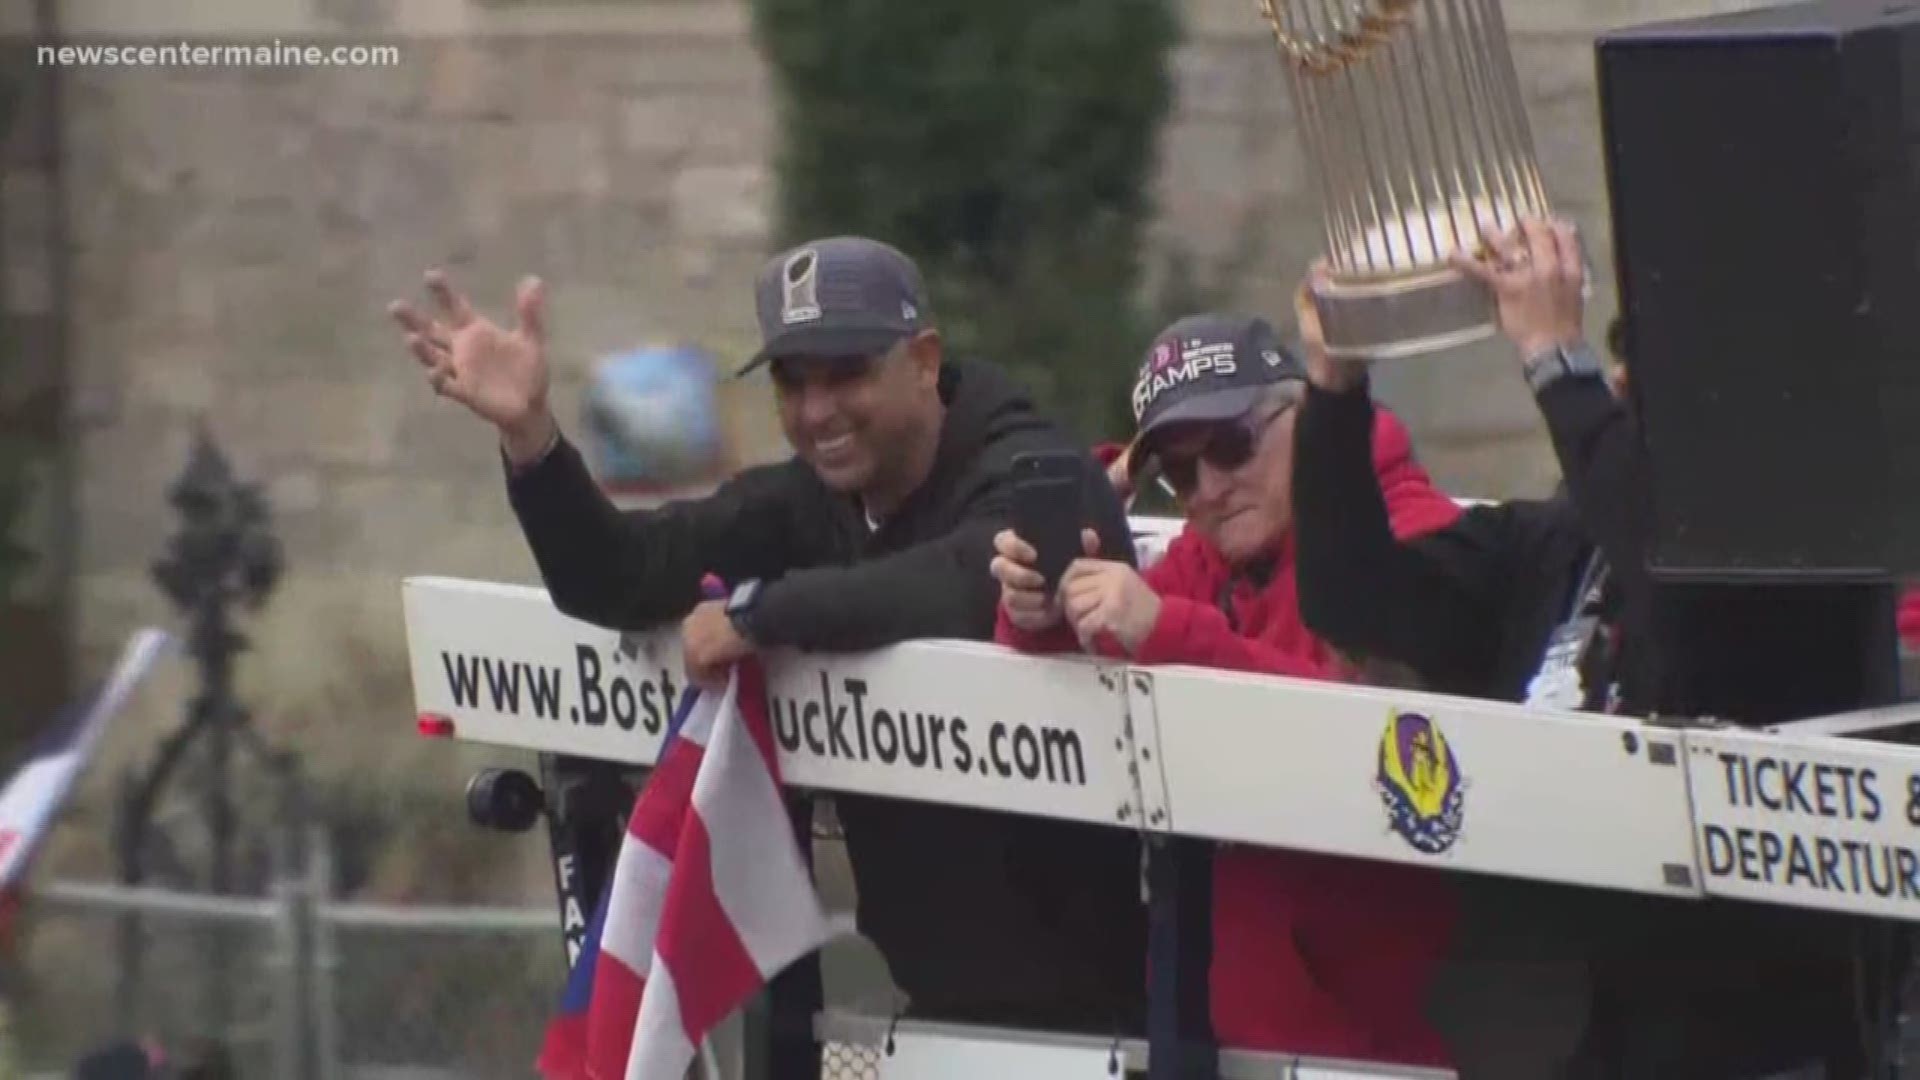 Red Sox manager, Alex Cora, reports that he does not feel comfortable celebrating while his homeland still needs help recovering.